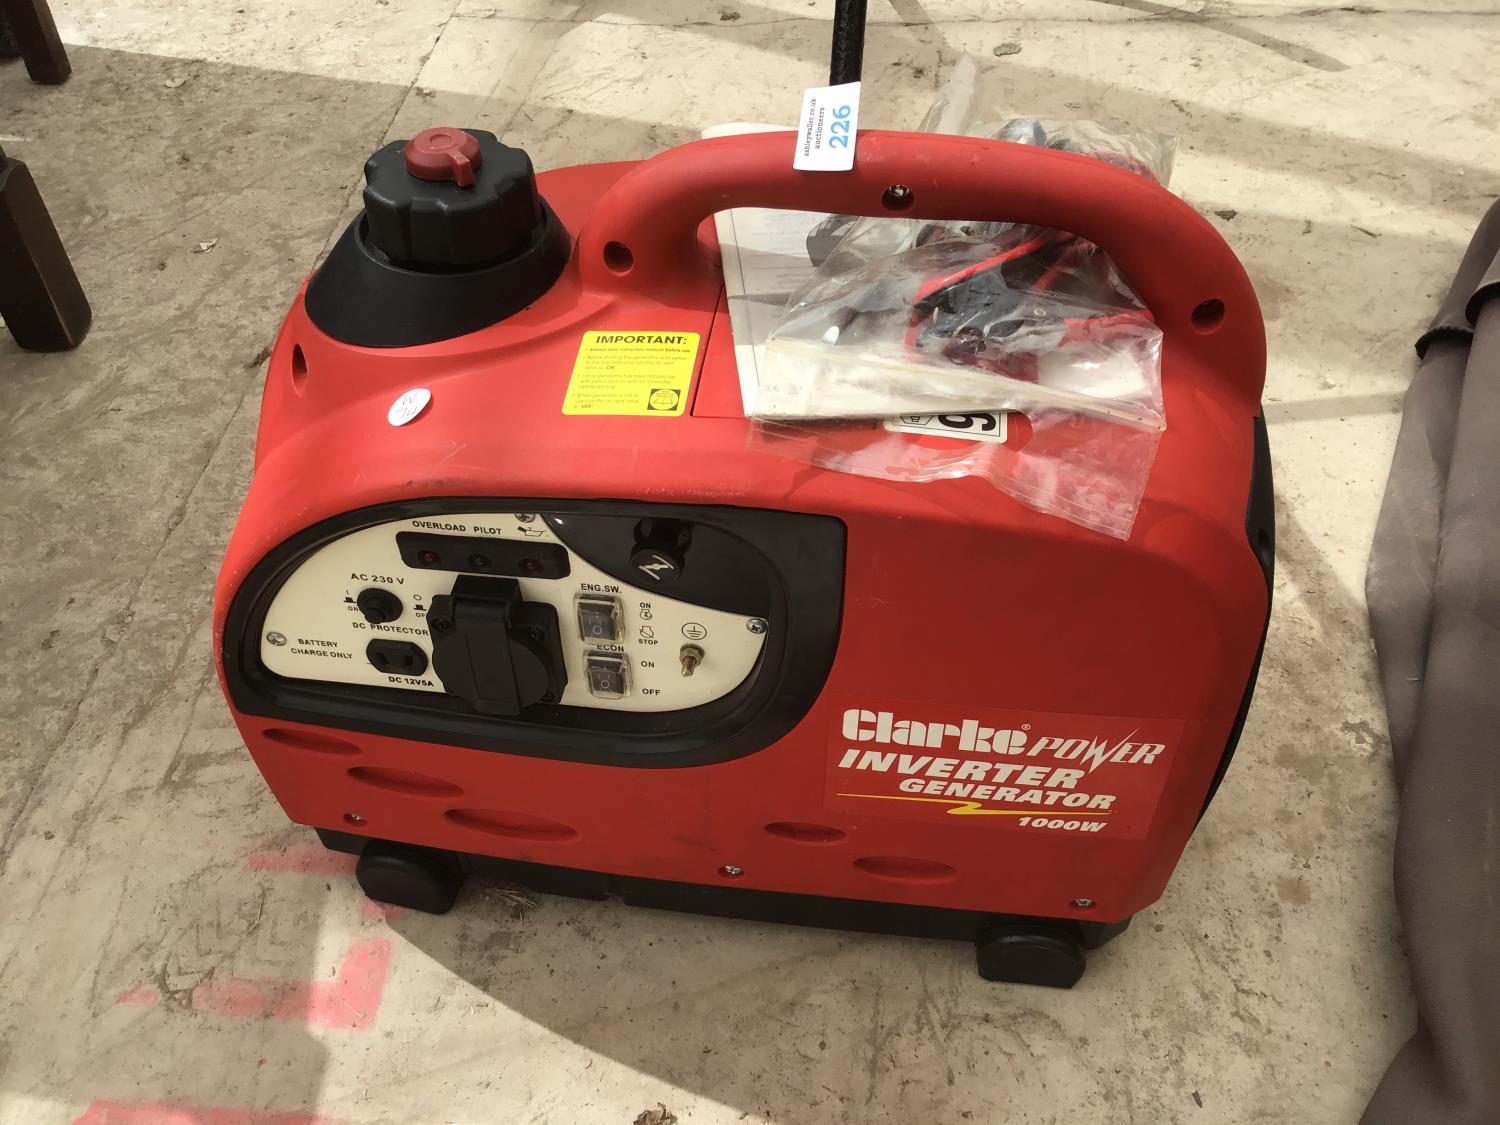 A CLARKE POWER INVERTOR GENERATOR 1000W, RECENTLY SERVICED AND IN WORKING ORDER